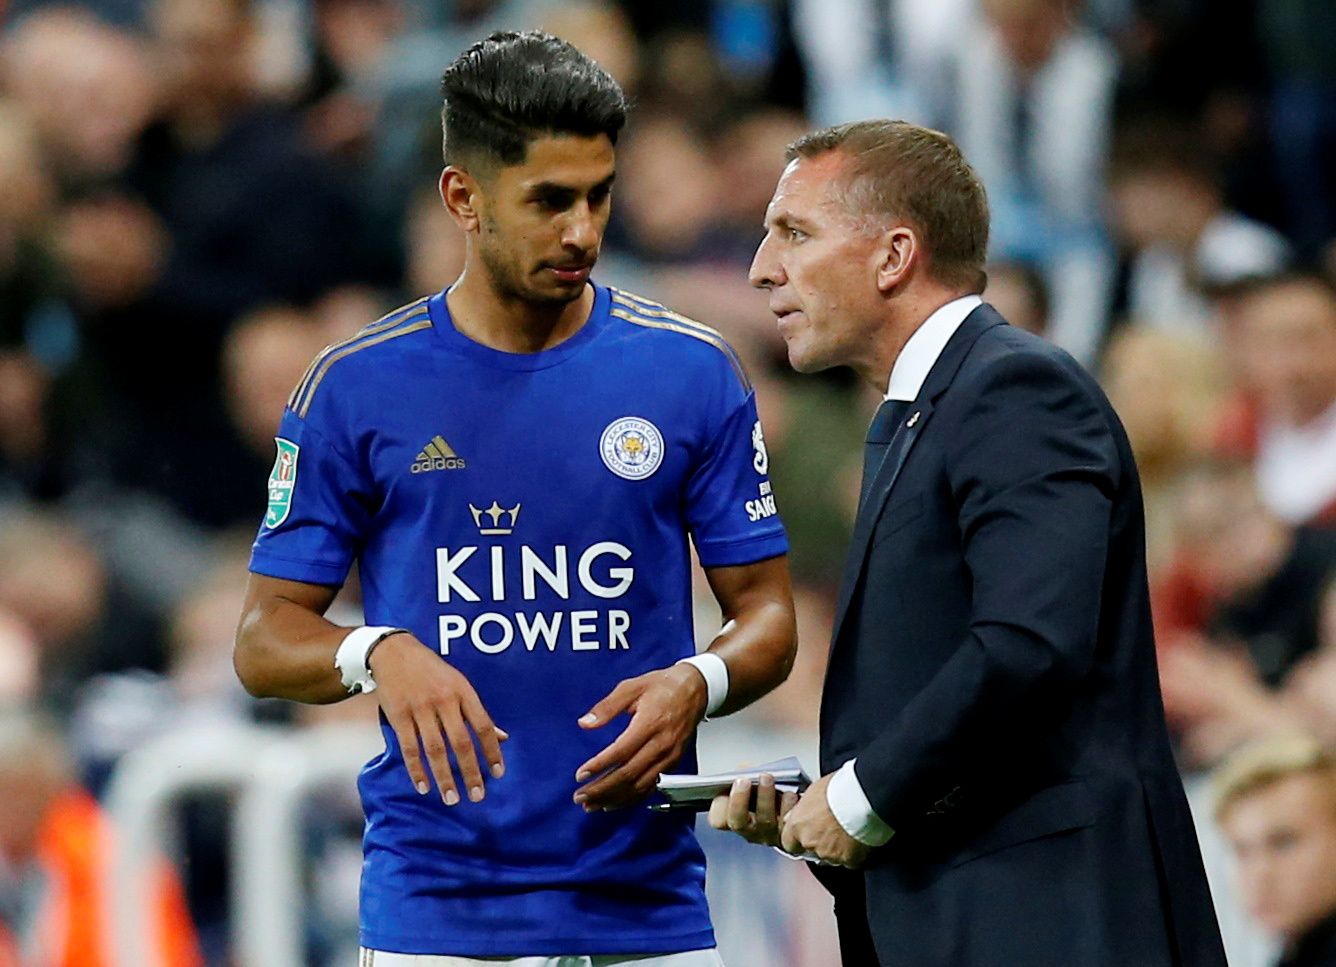 Soccer Football - Carabao Cup Second Round - Newcastle United v Leicester City - St James' Park, Newcastle, Britain - August 28, 2019  Leicester City manager Brendan Rodgers speaks to Leicester City's Ayoze Perez   Action Images via Reuters/Ed Sykes  EDITORIAL USE ONLY. No use with unauthorized audio, video, data, fixture lists, club/league logos or 